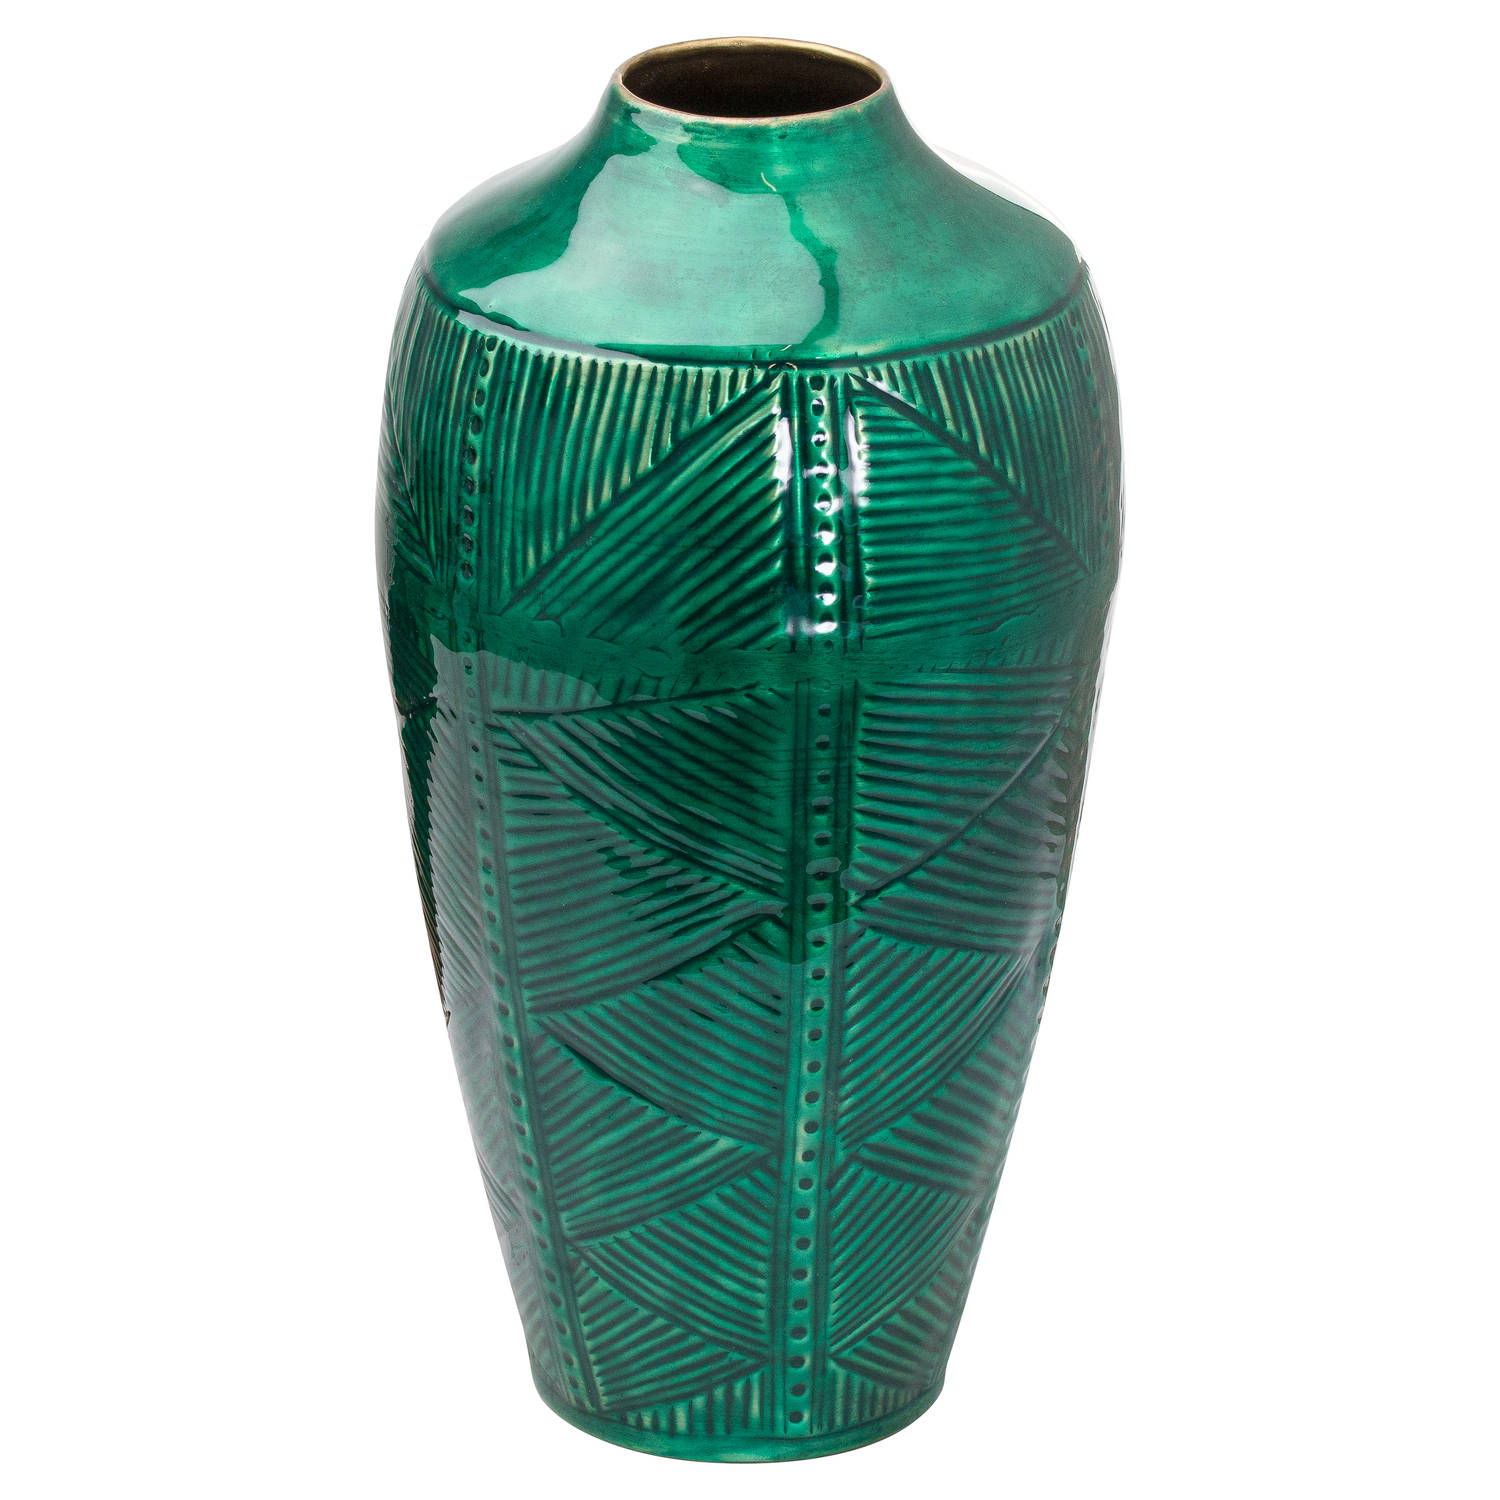 Aztec Collection Brass embossed Ceramic Dipped Urn Vase - Image 1